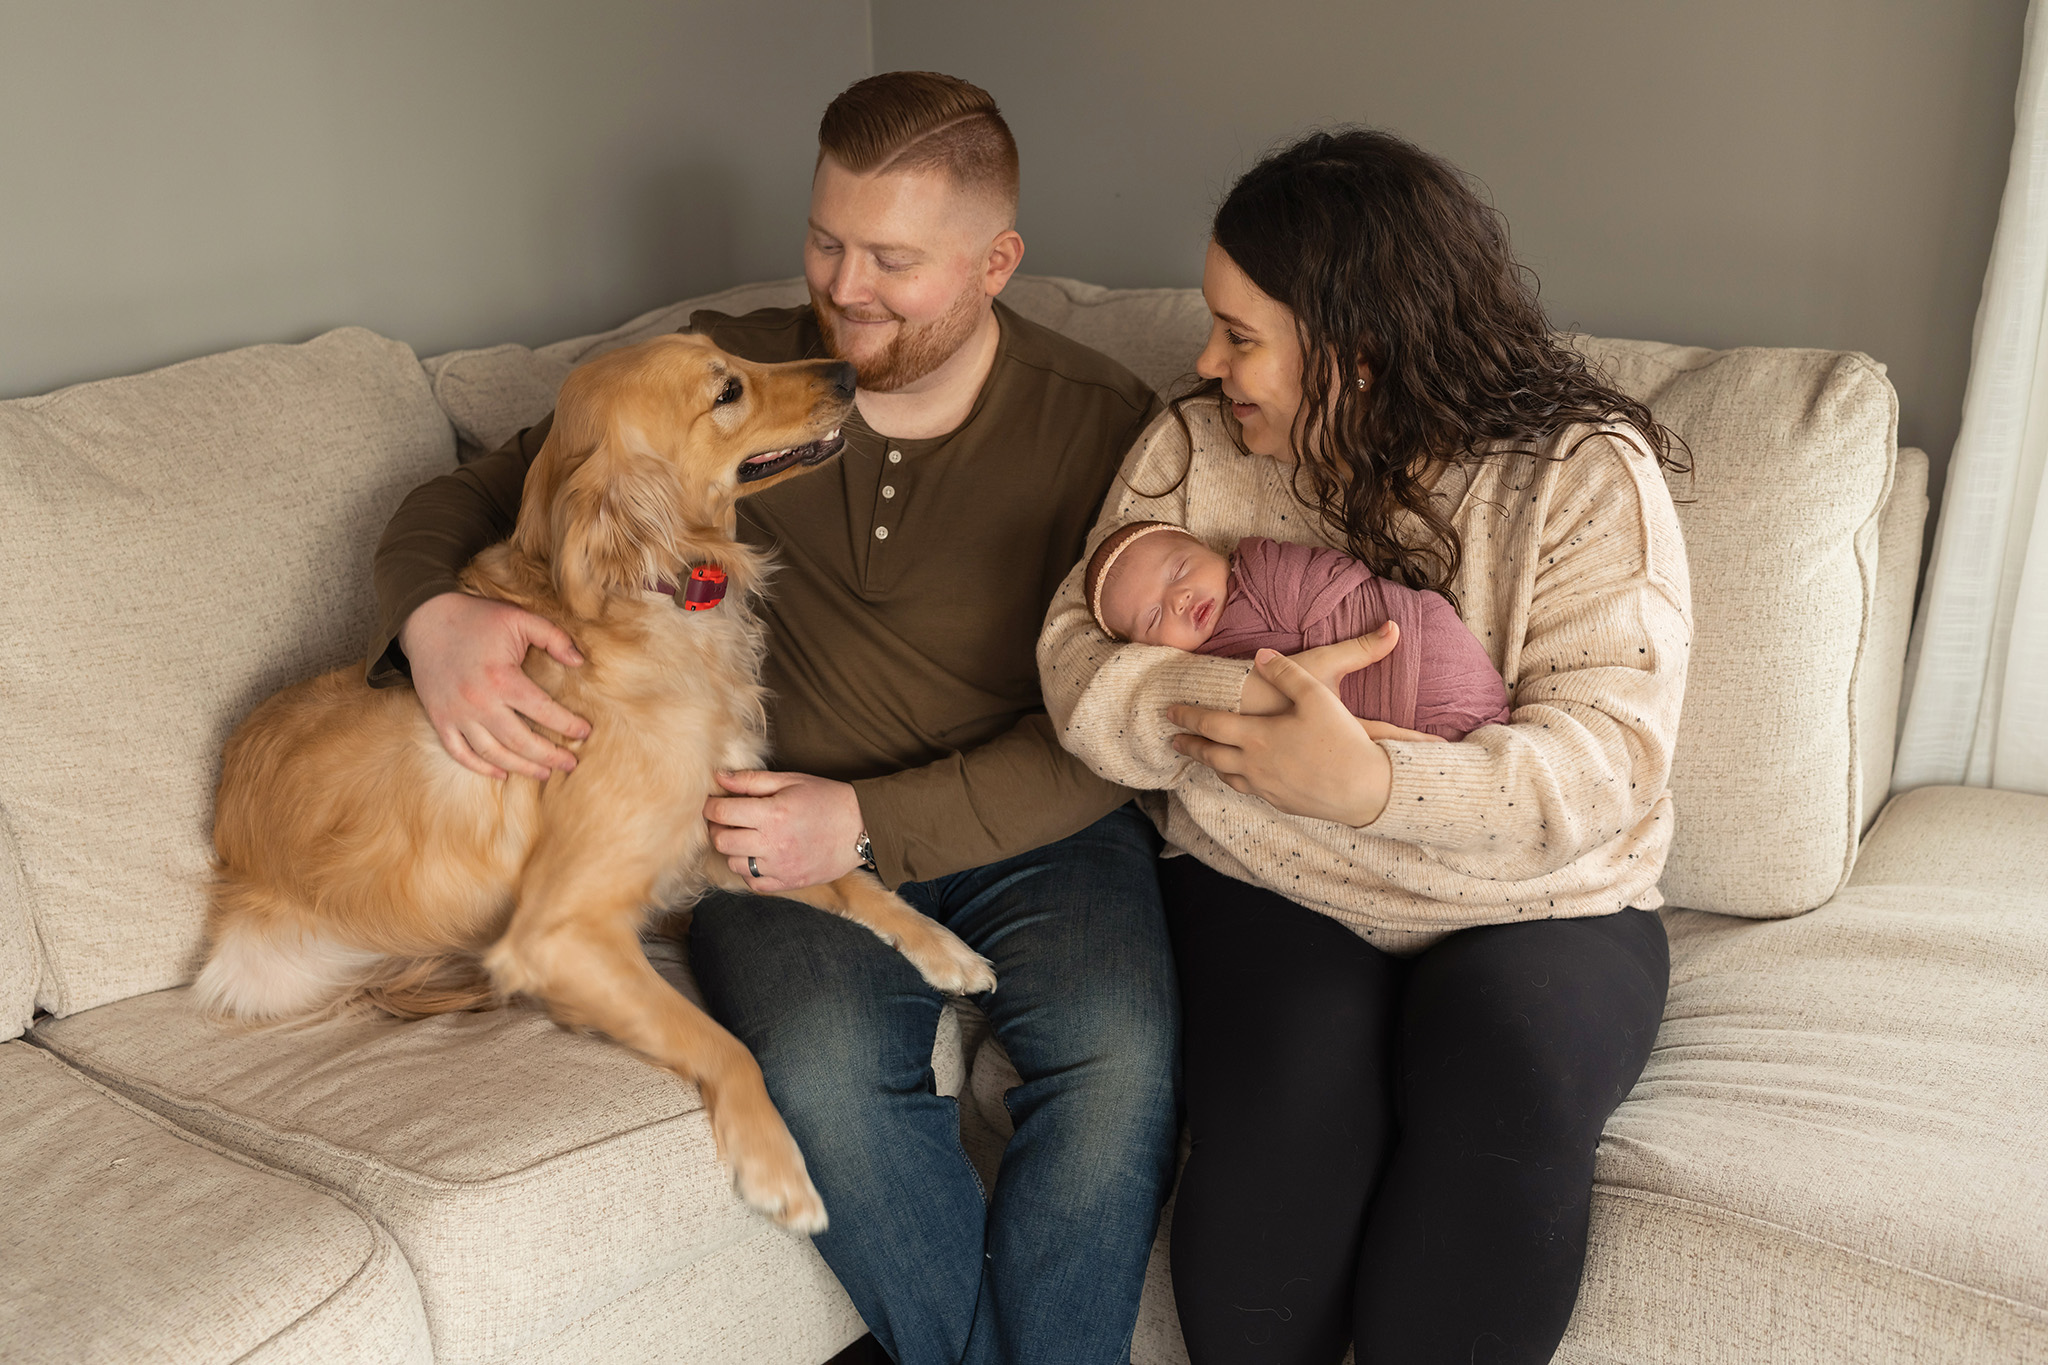 A golden retriever smiles while sitting on a couch with mom and dad with their newborn baby girl